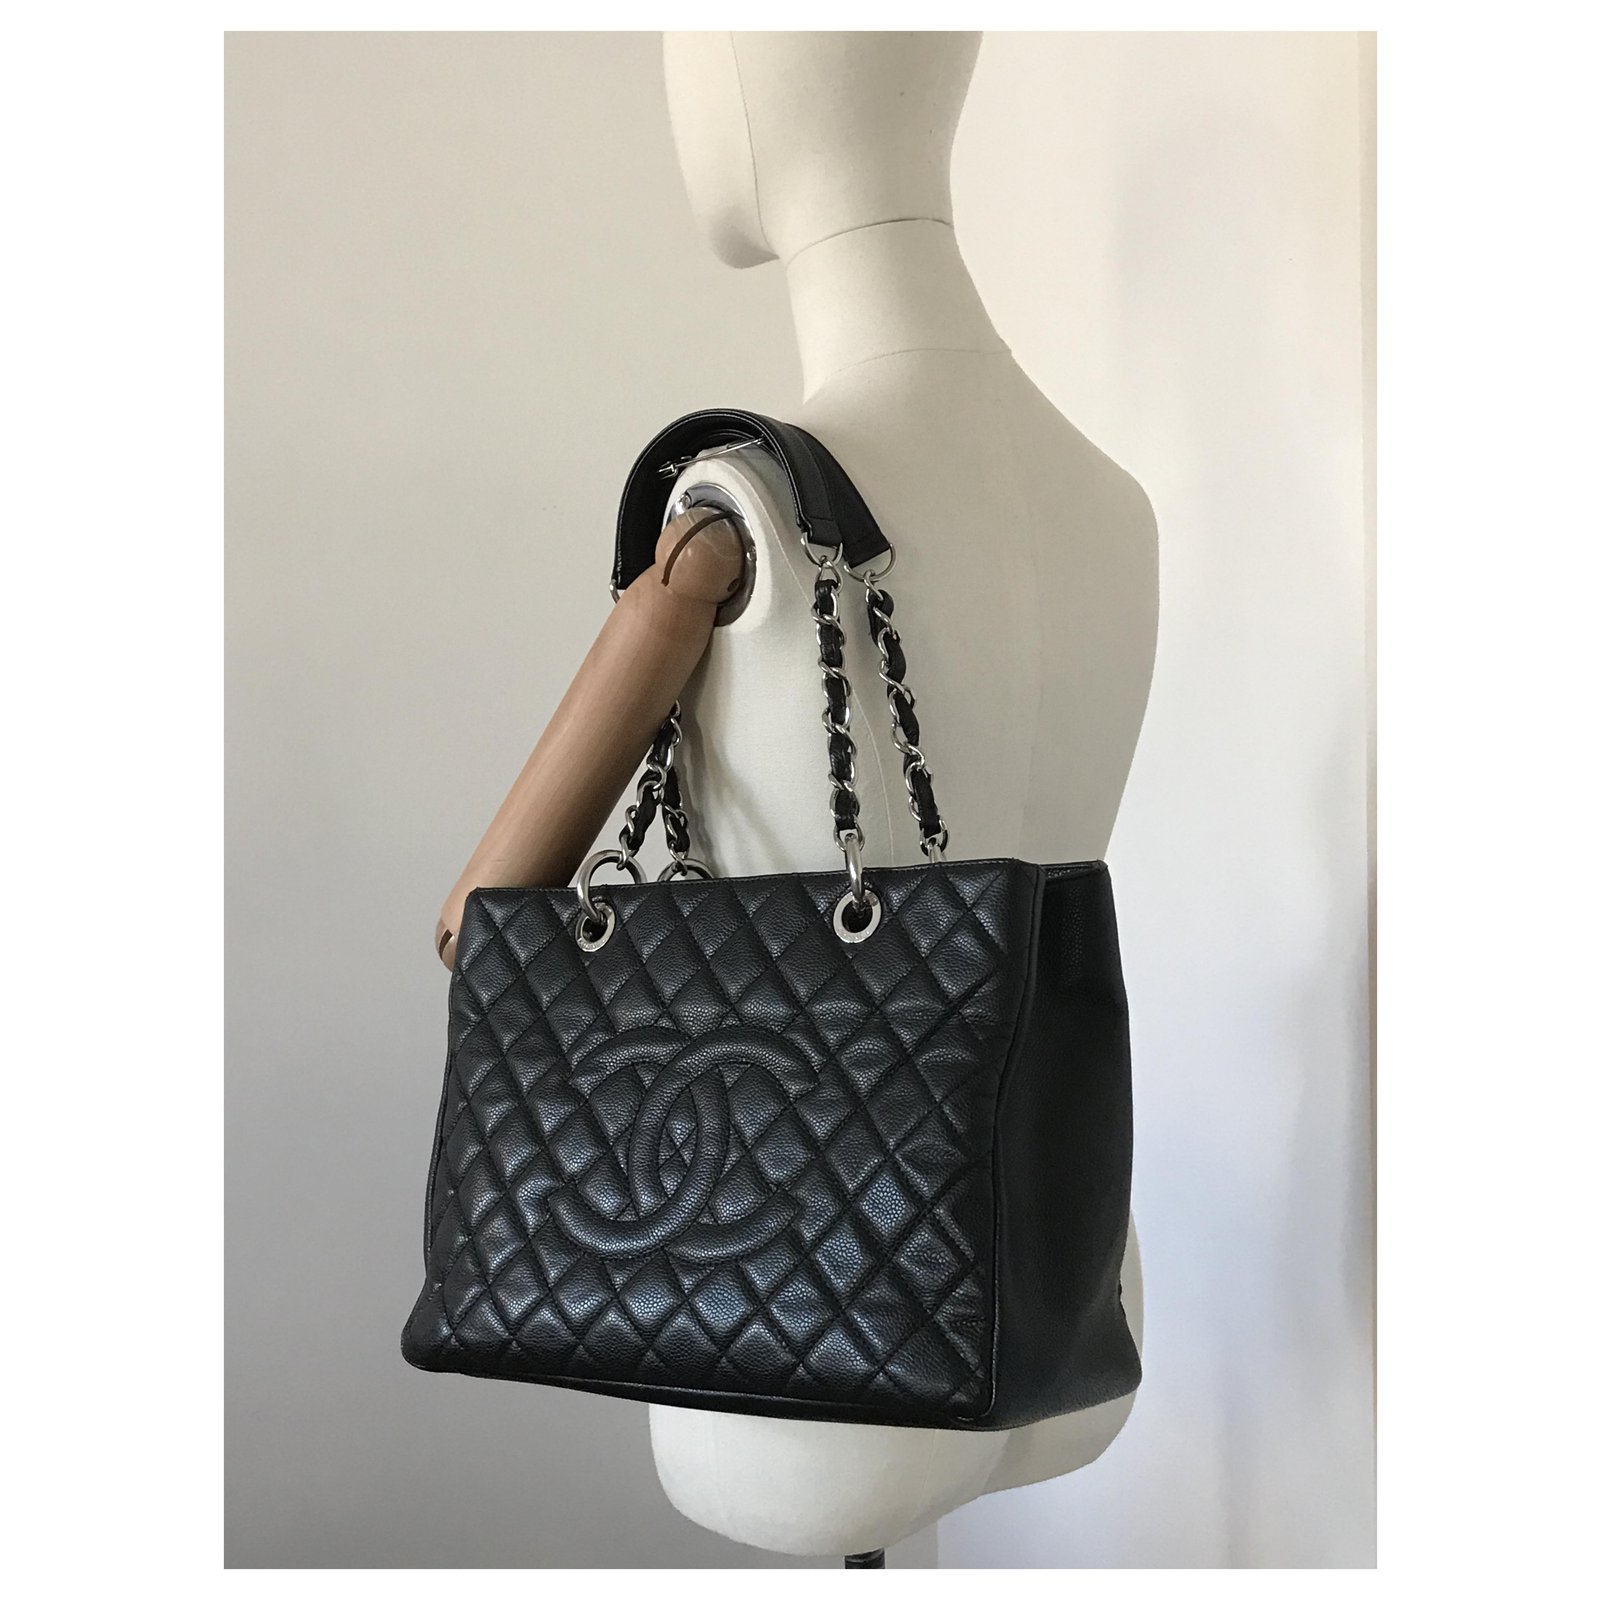 Just In….Chanel grand shopping tote